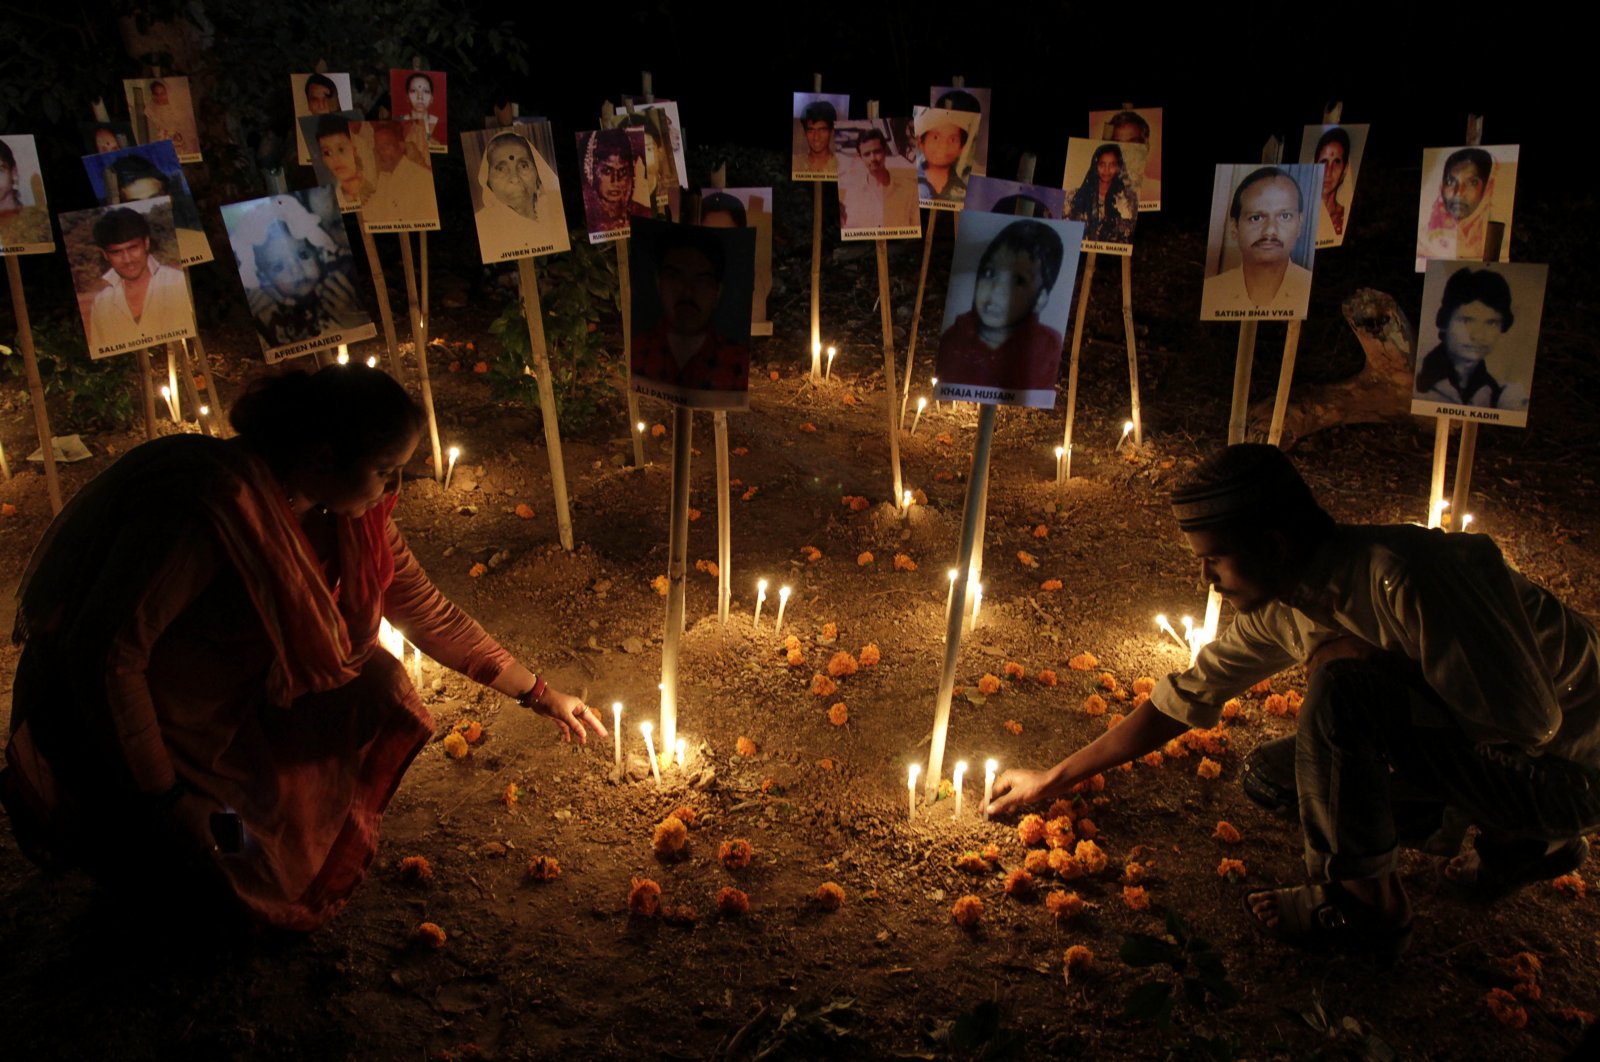 Indians participate in a candlelight vigil to mark the 10th anniversary of the Gujarat riots as photographs of riot victims stand in the background, Ahmadabad, India, Feb. 24, 2012. (AP Photo)